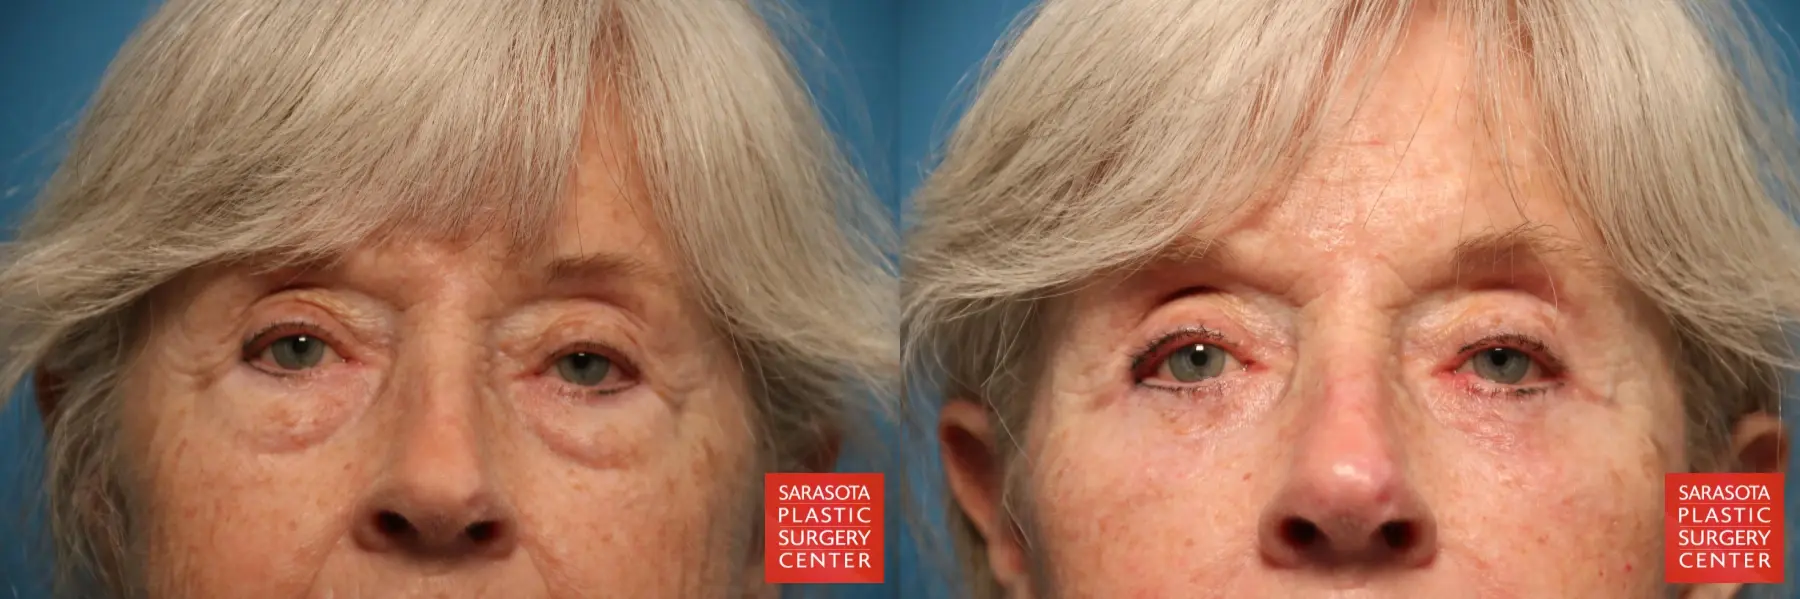 Eyelid Lift: Patient 15 - Before and After 1